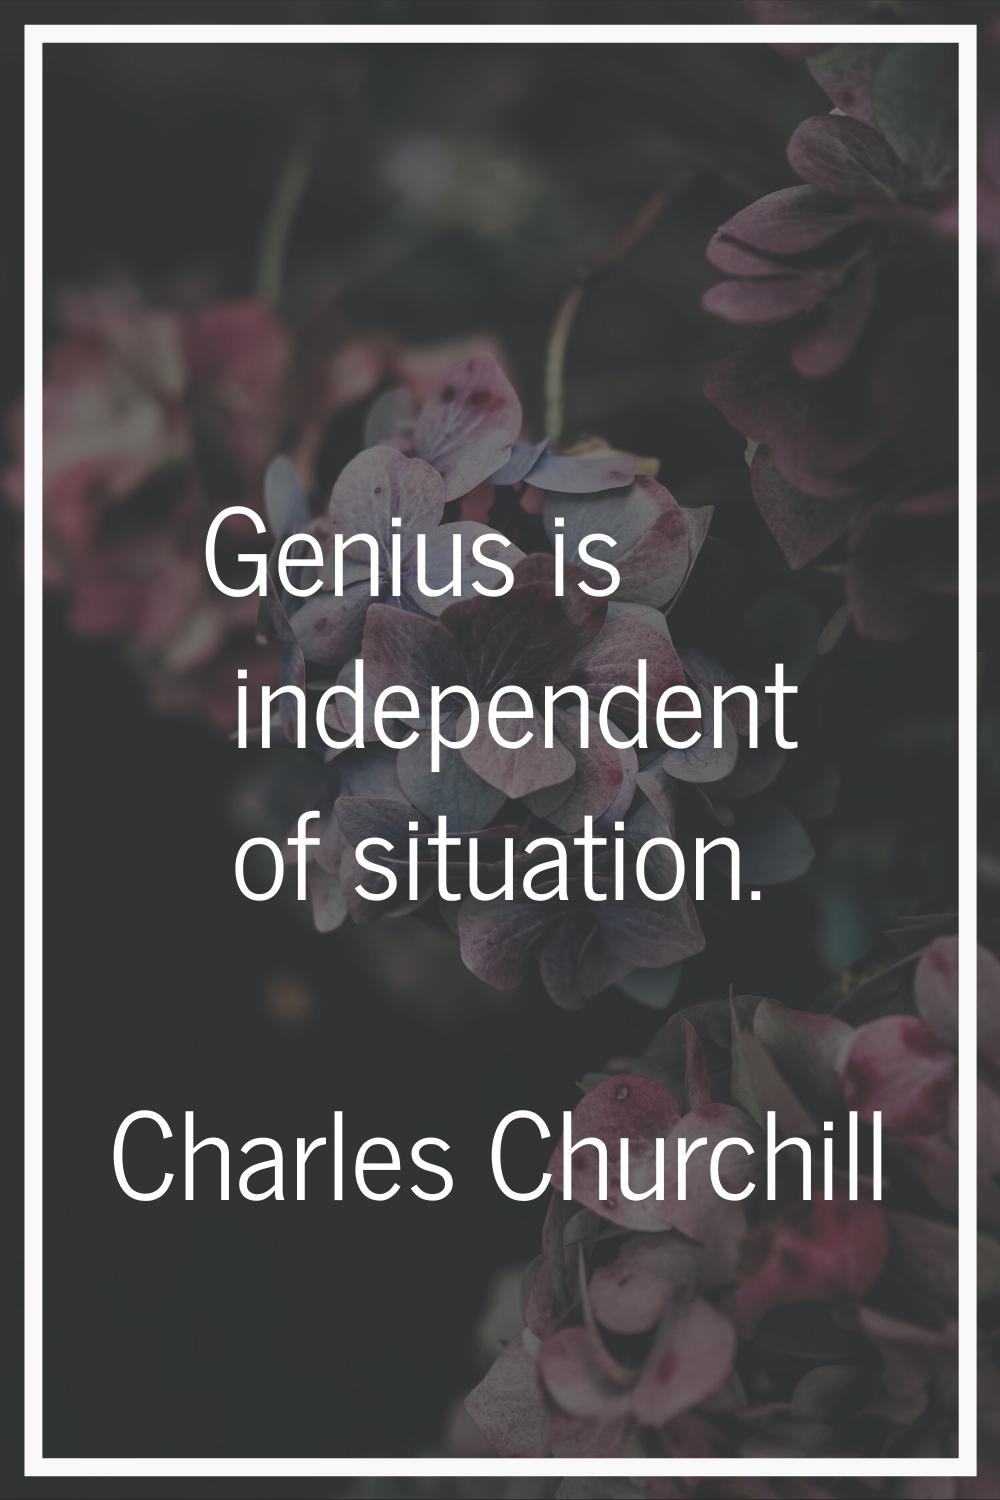 Genius is independent of situation.